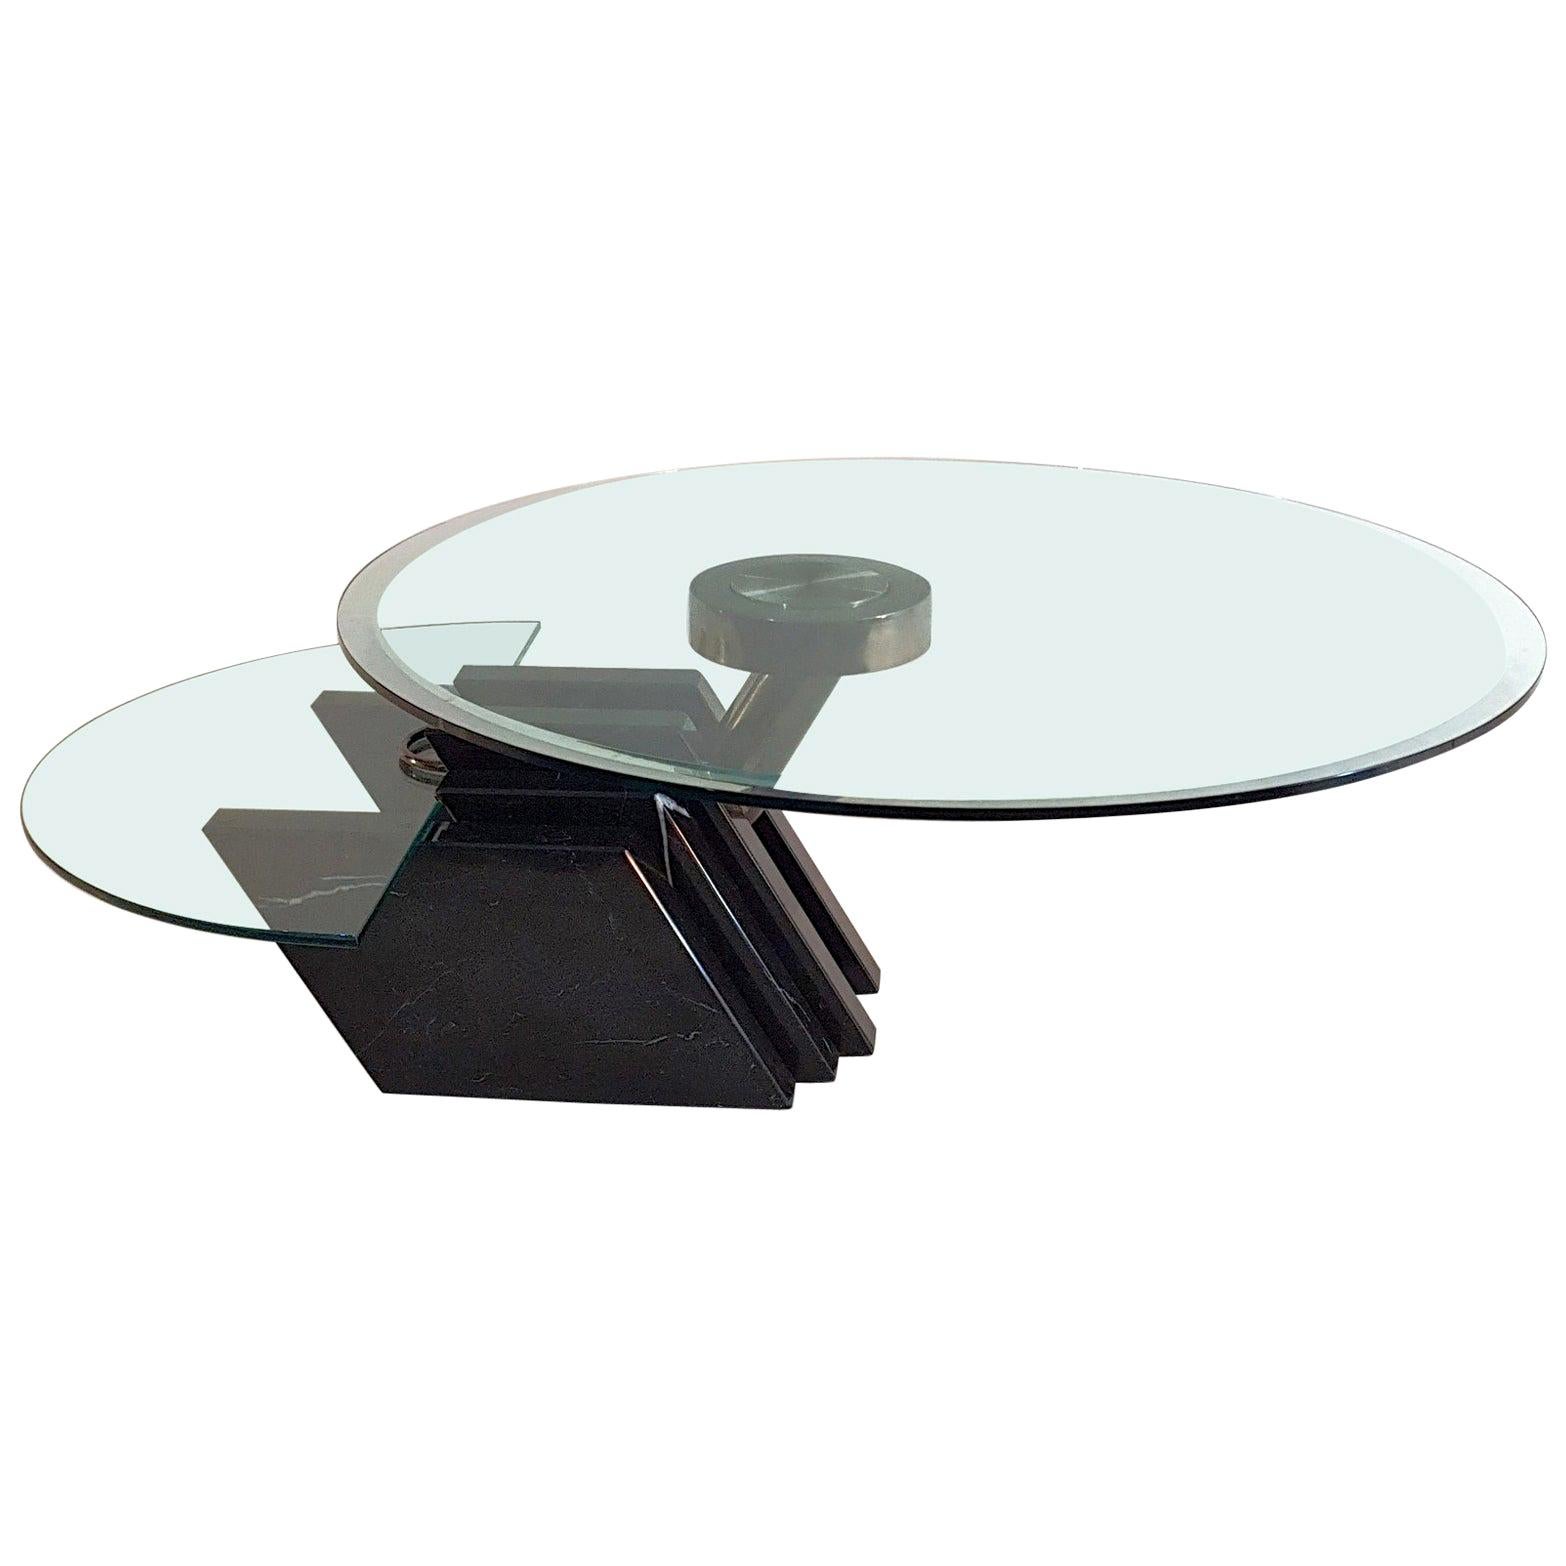 Swivel Coffee Table in Black Marble and Glass Made in Italy